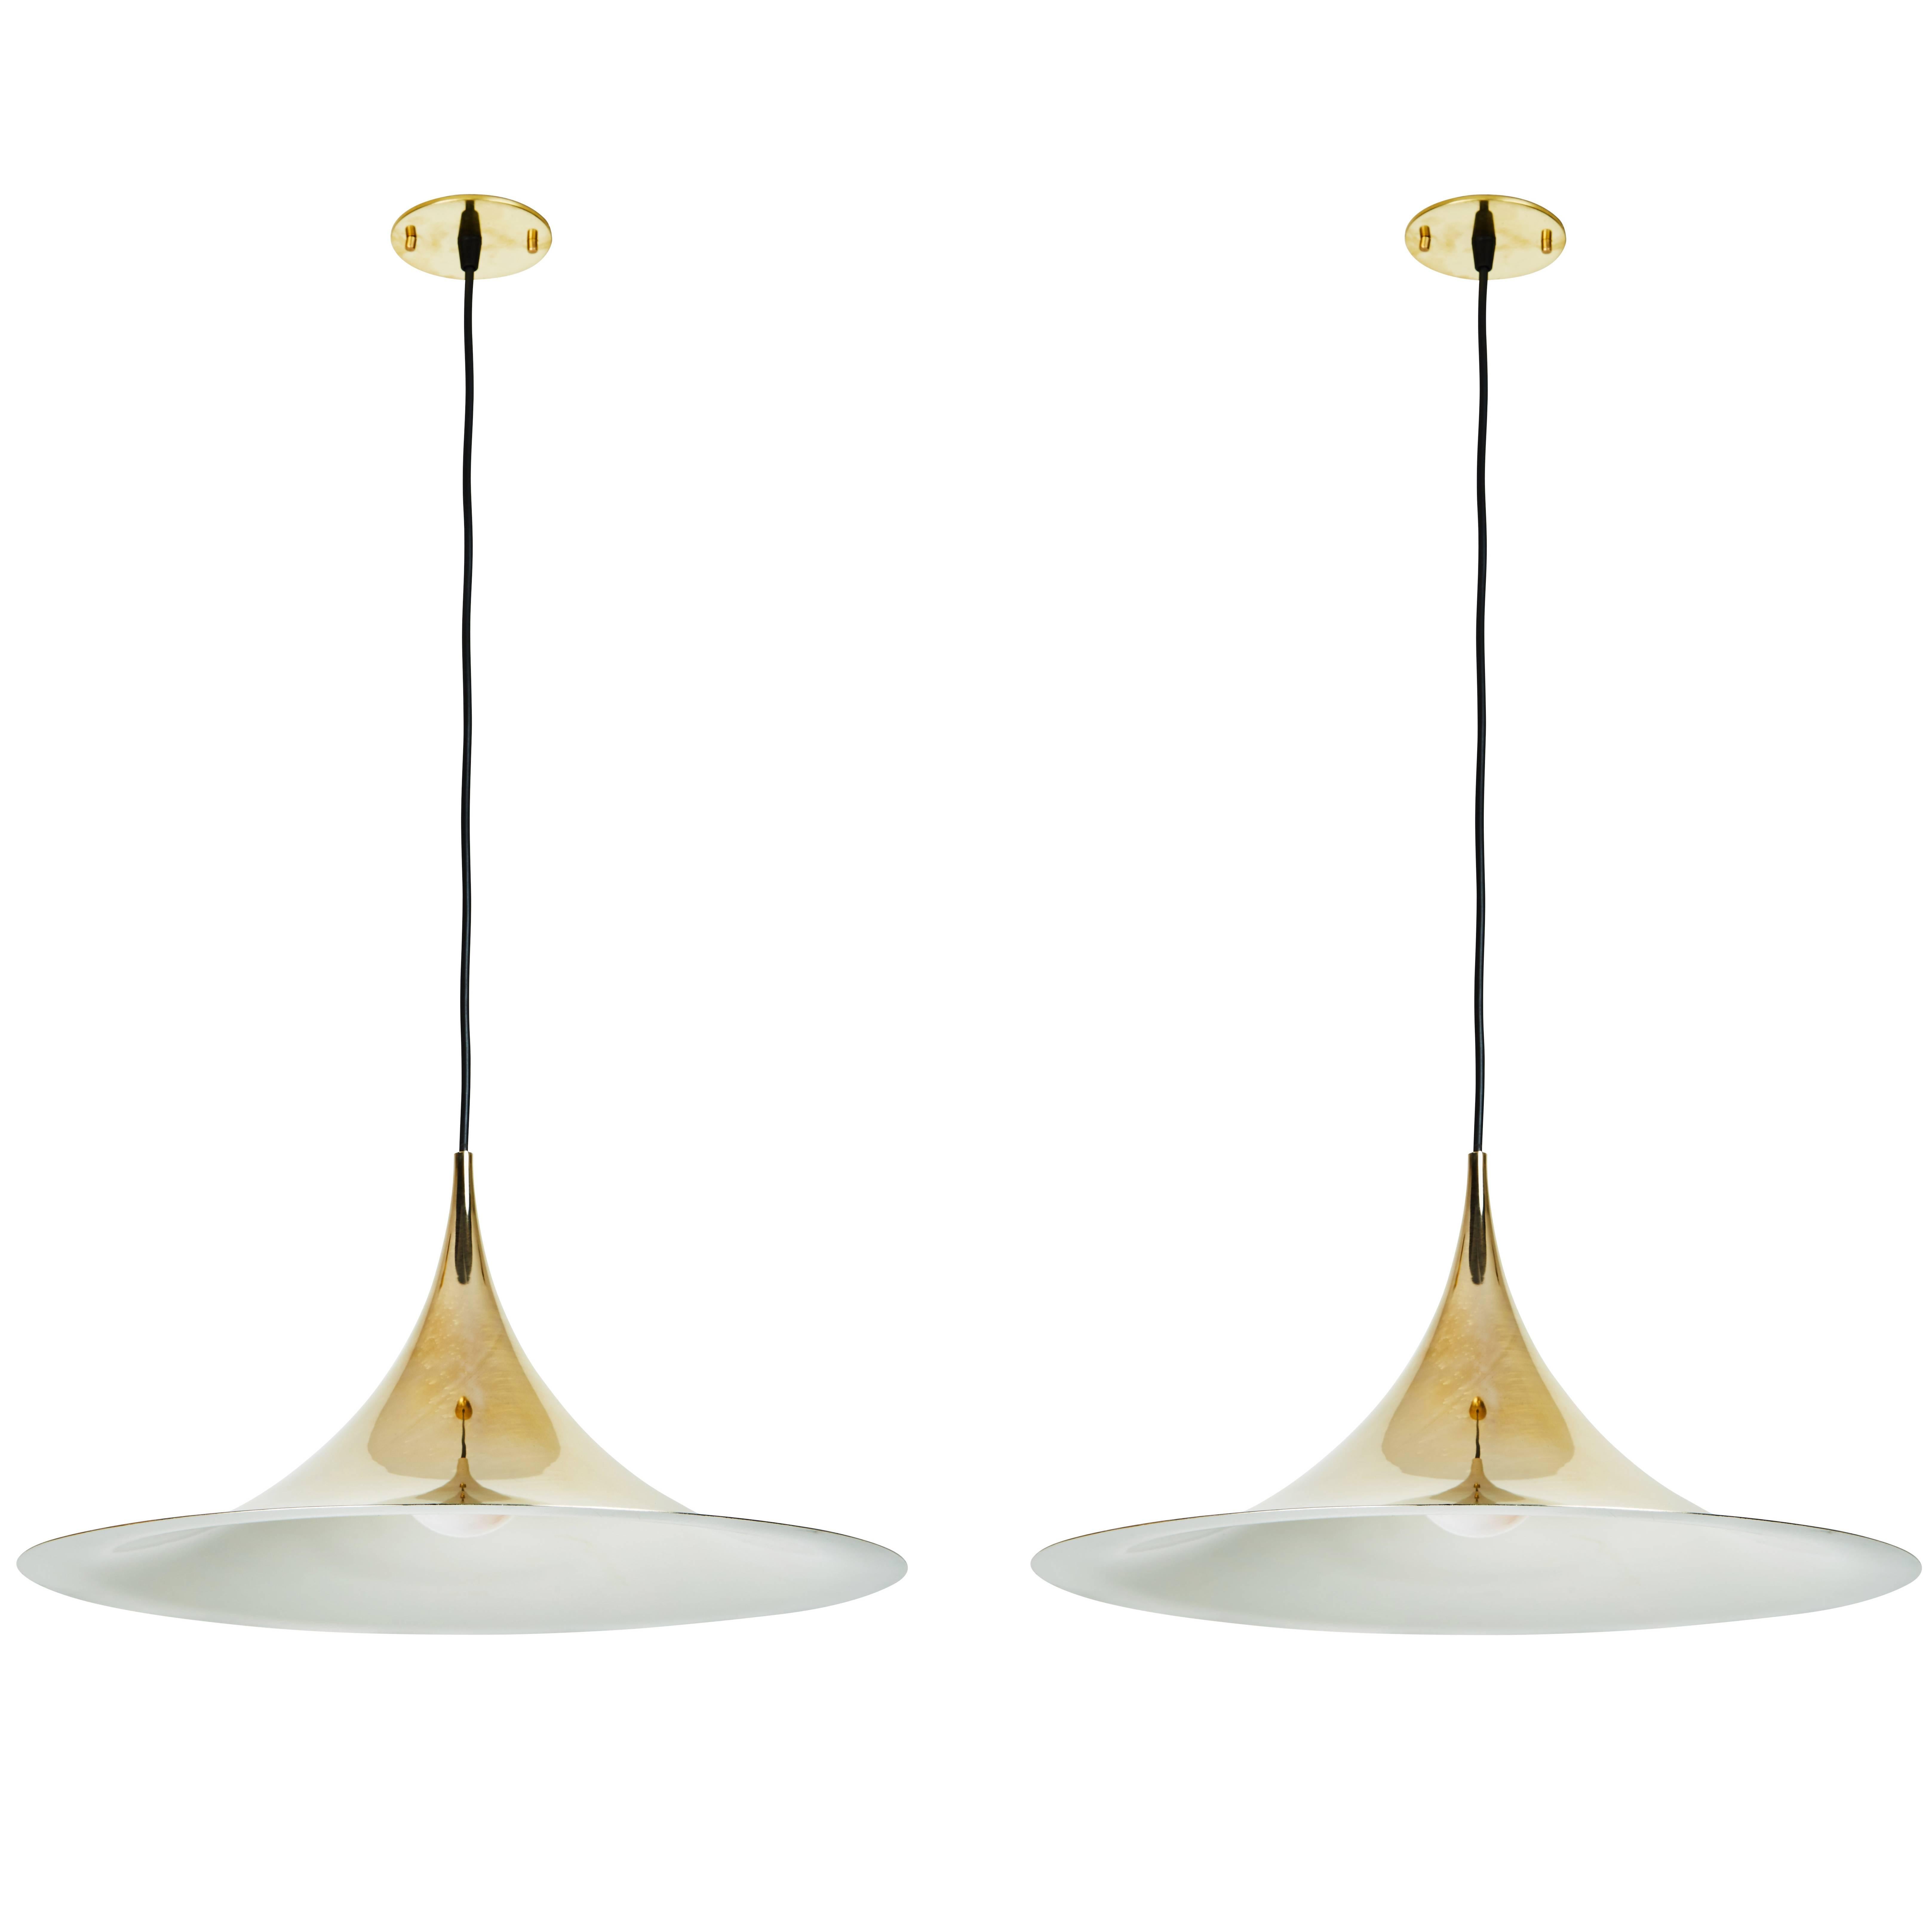 Two Brass "Semi" Pendants by Bonderup and Thorup for Fog & Mørup